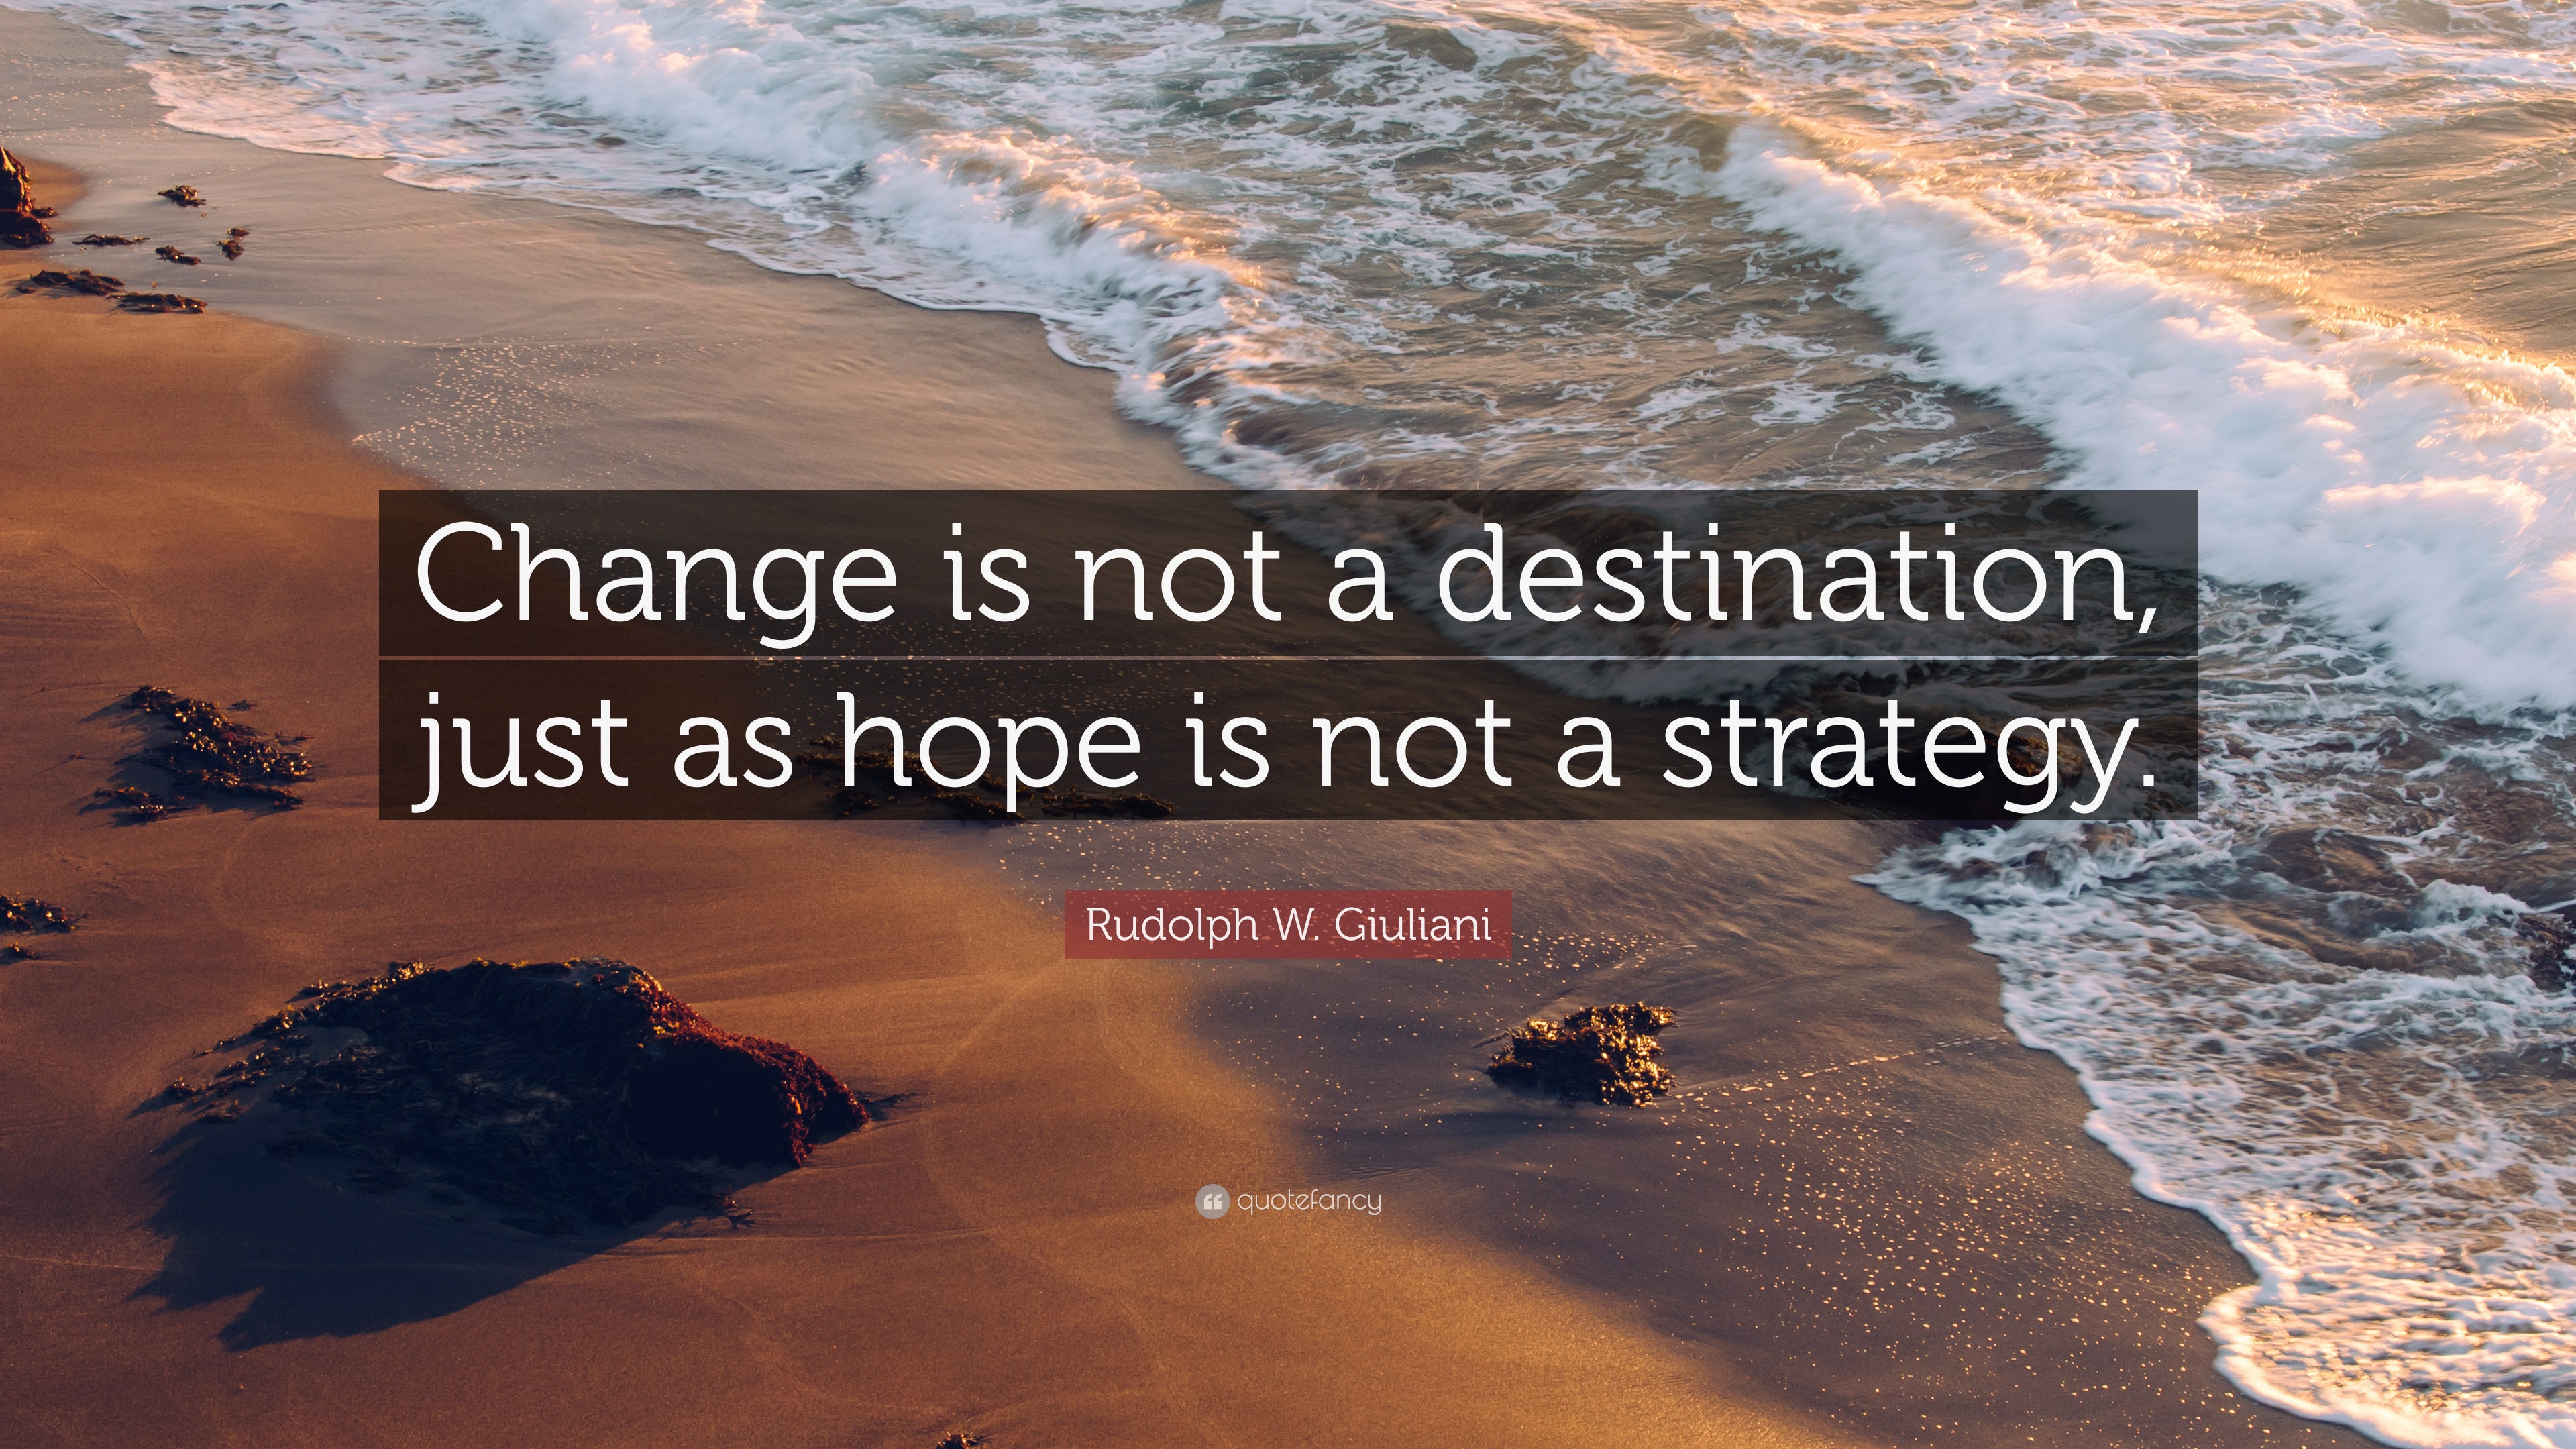 Rudolph W. Giuliani Quote: “Change is not a destination, just as hope ...